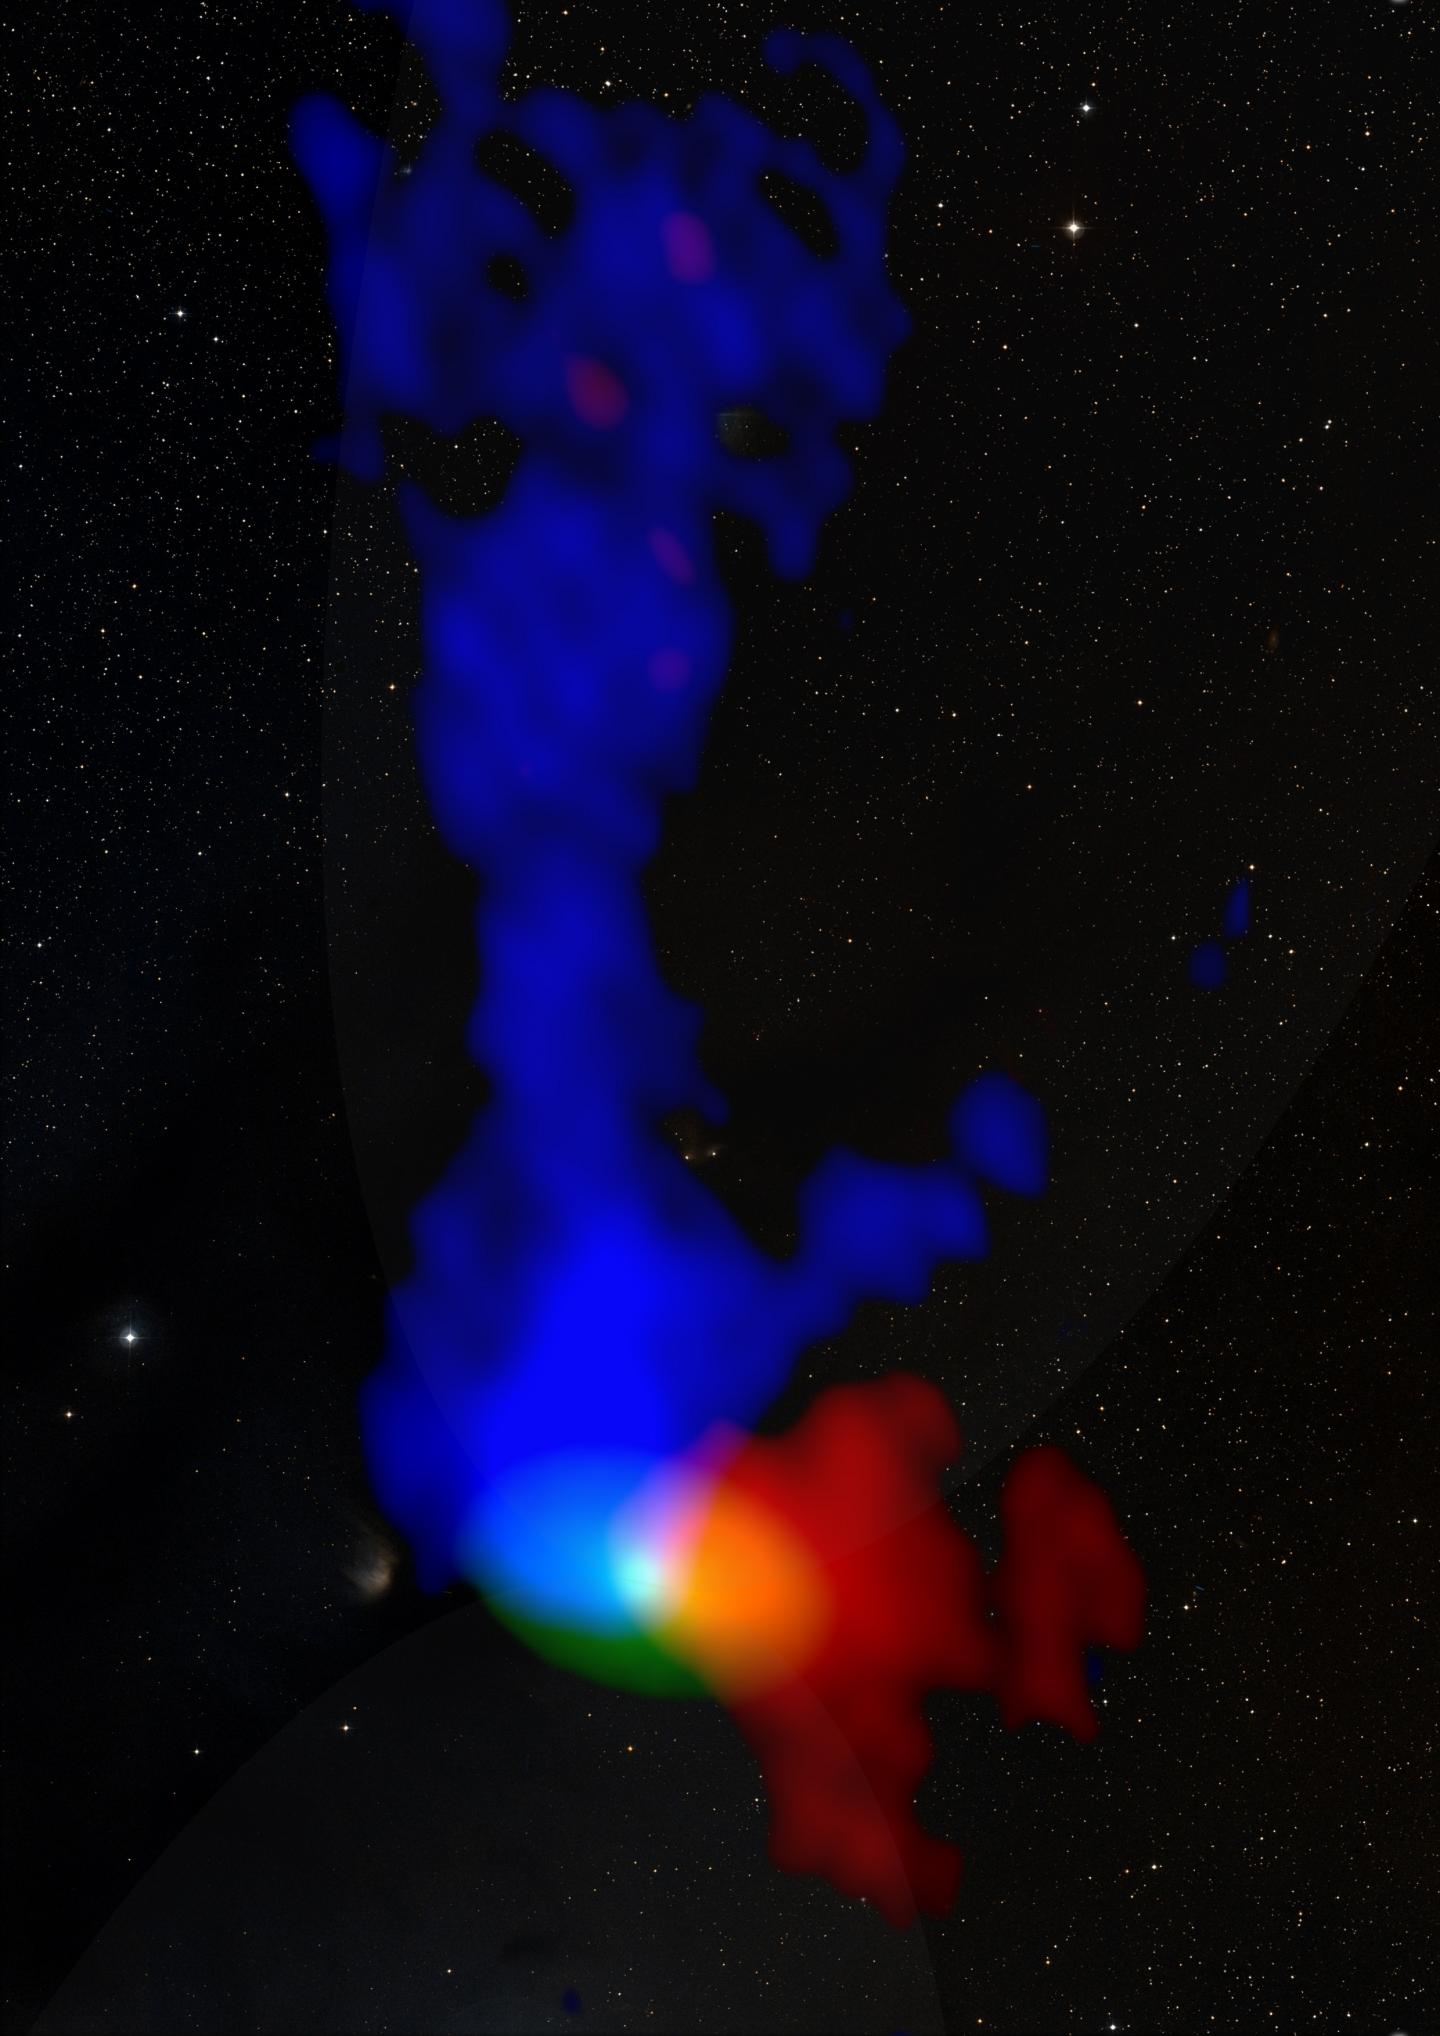 ALMA Observations of a Young Protostar